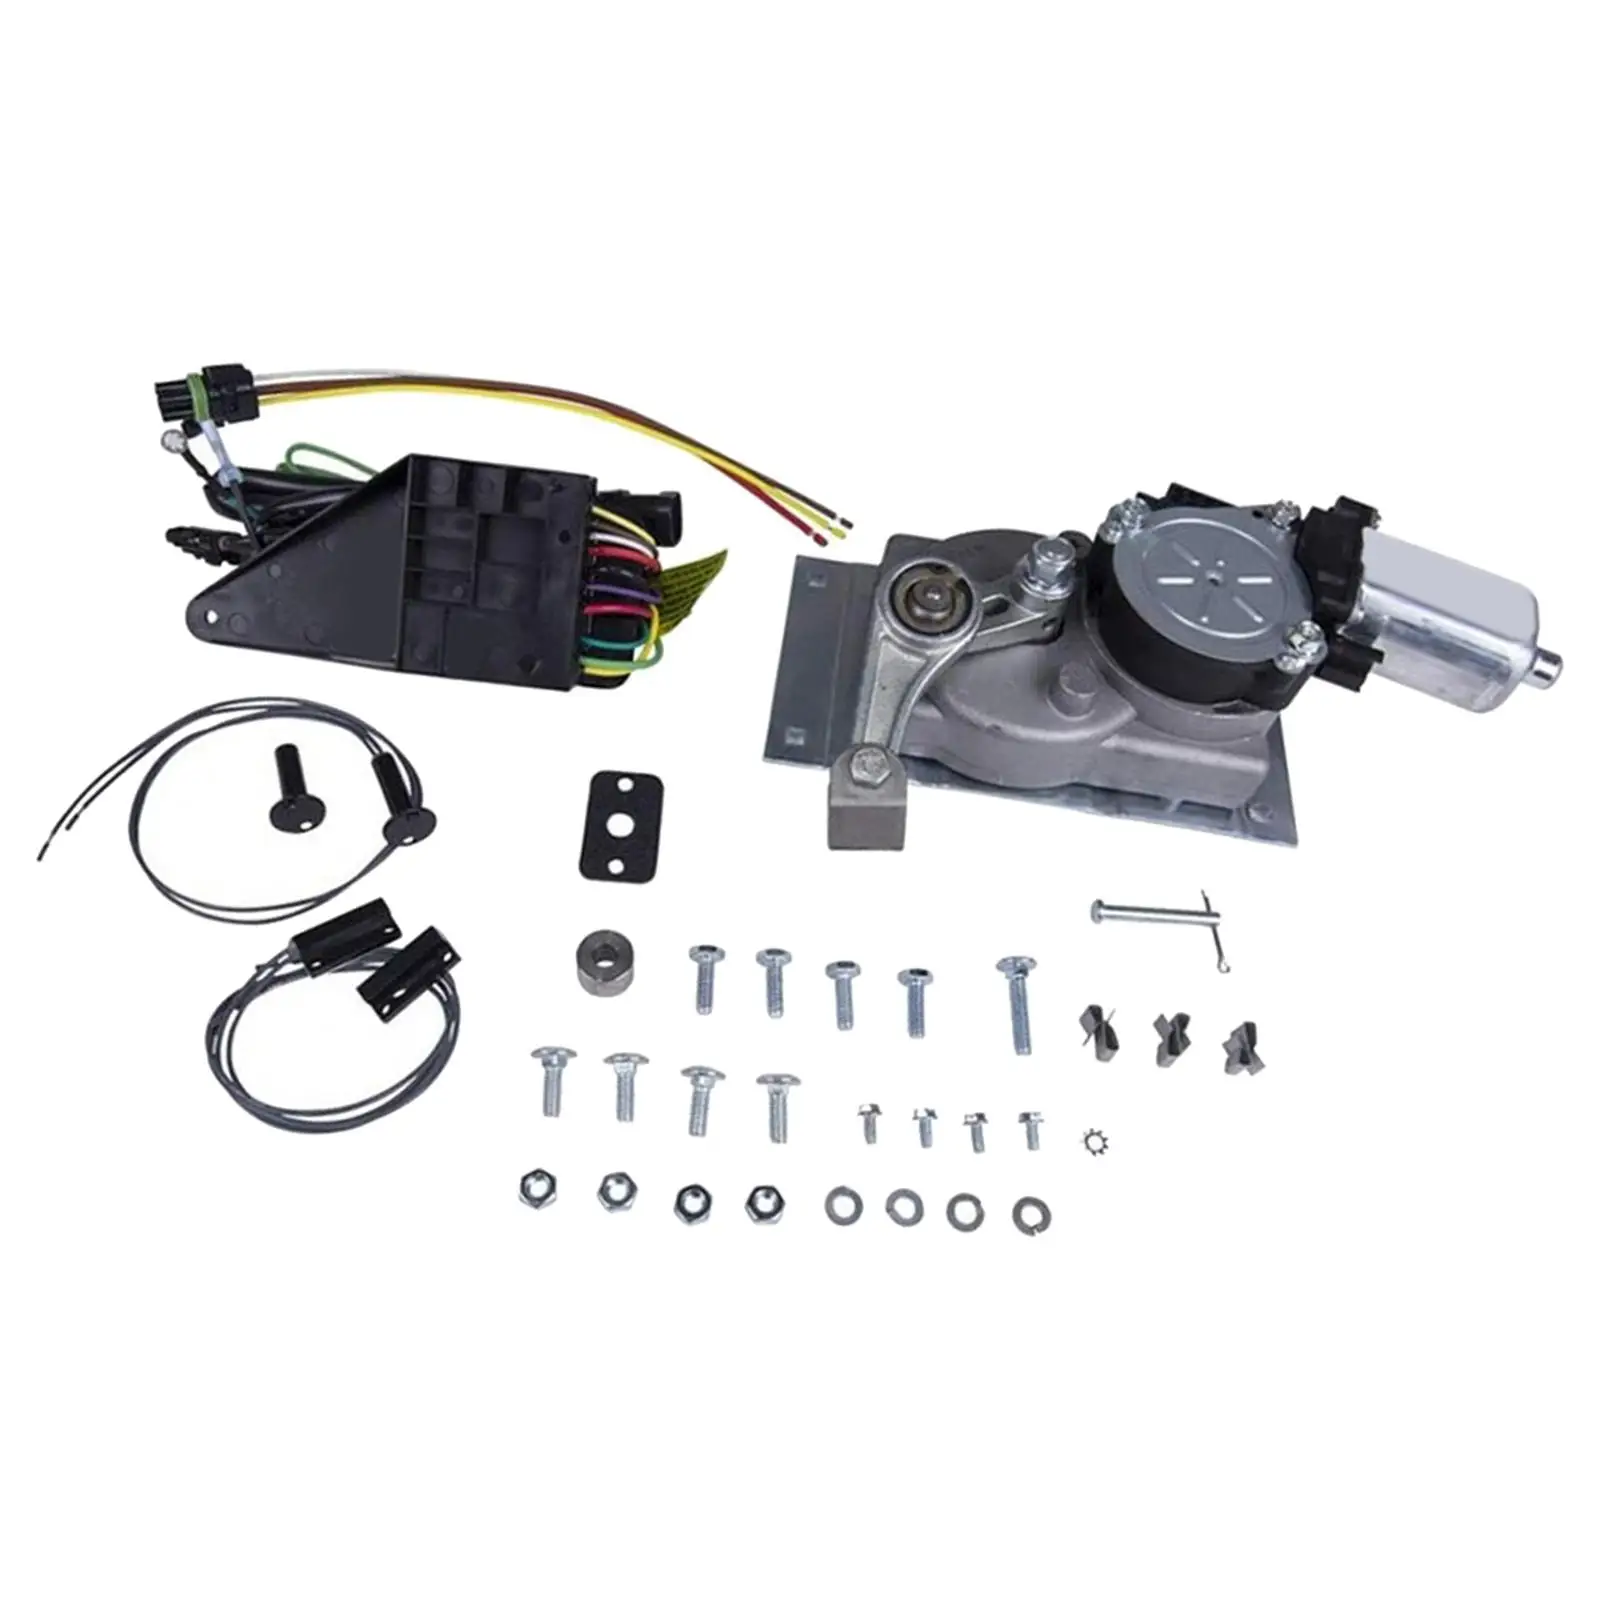 RV Trailer Step Motor Conversion Kit Motor Conversion Kit 379146 for Rvs Travel Trailers Replacement Repair Easy to Install